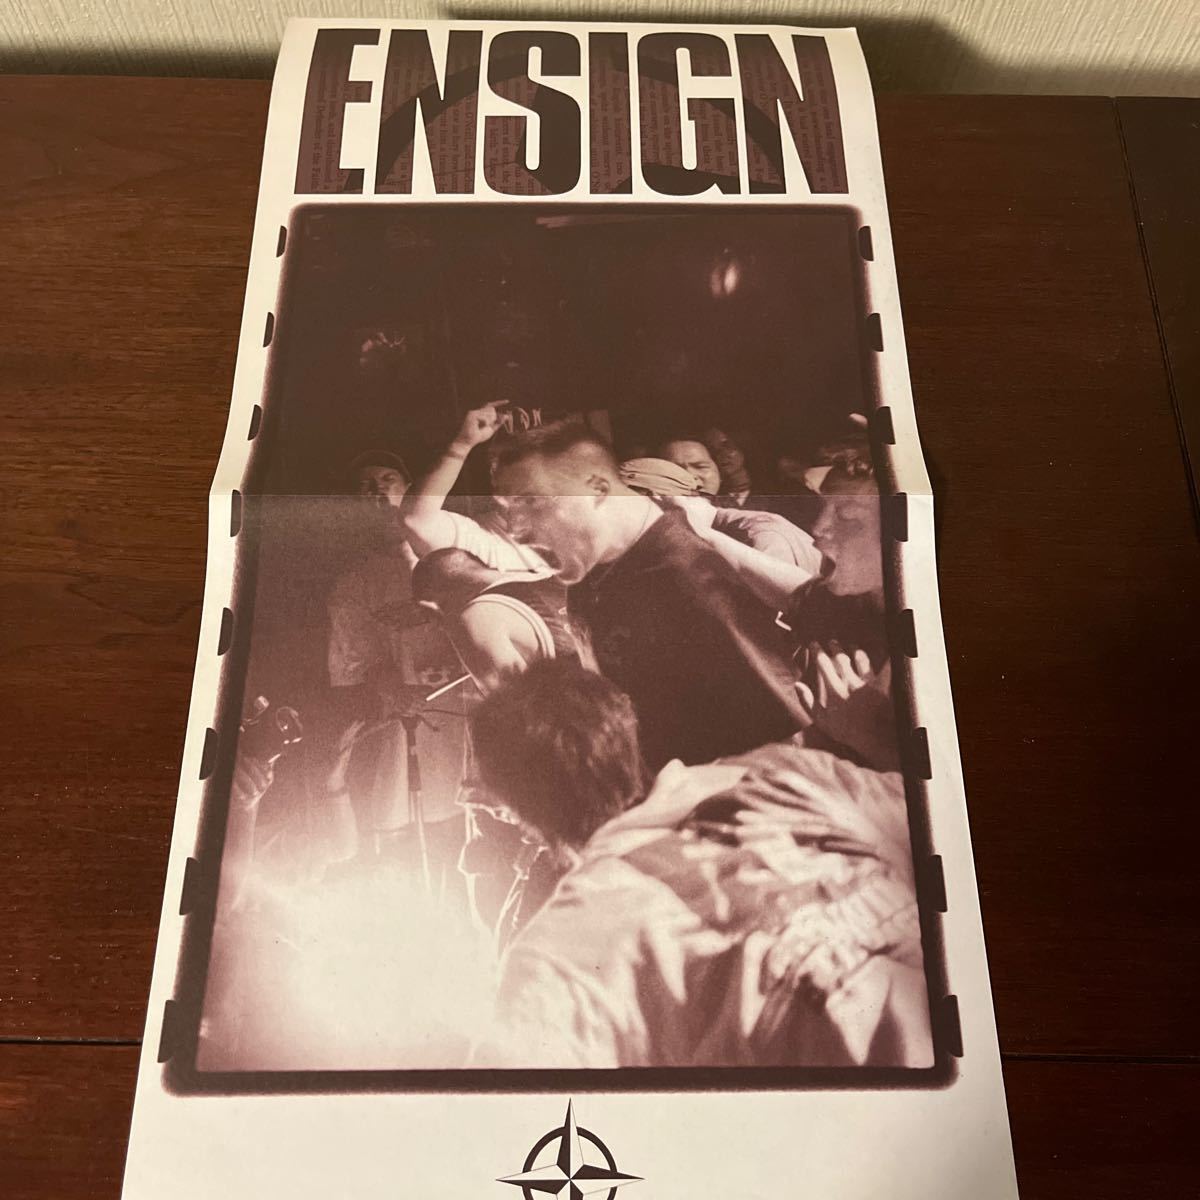 【LP】Ensign / Cast The First Stone Nitro Records 15823-1 US Orig 1999 検）Hardcore Punk Red ヴァイナル_画像6